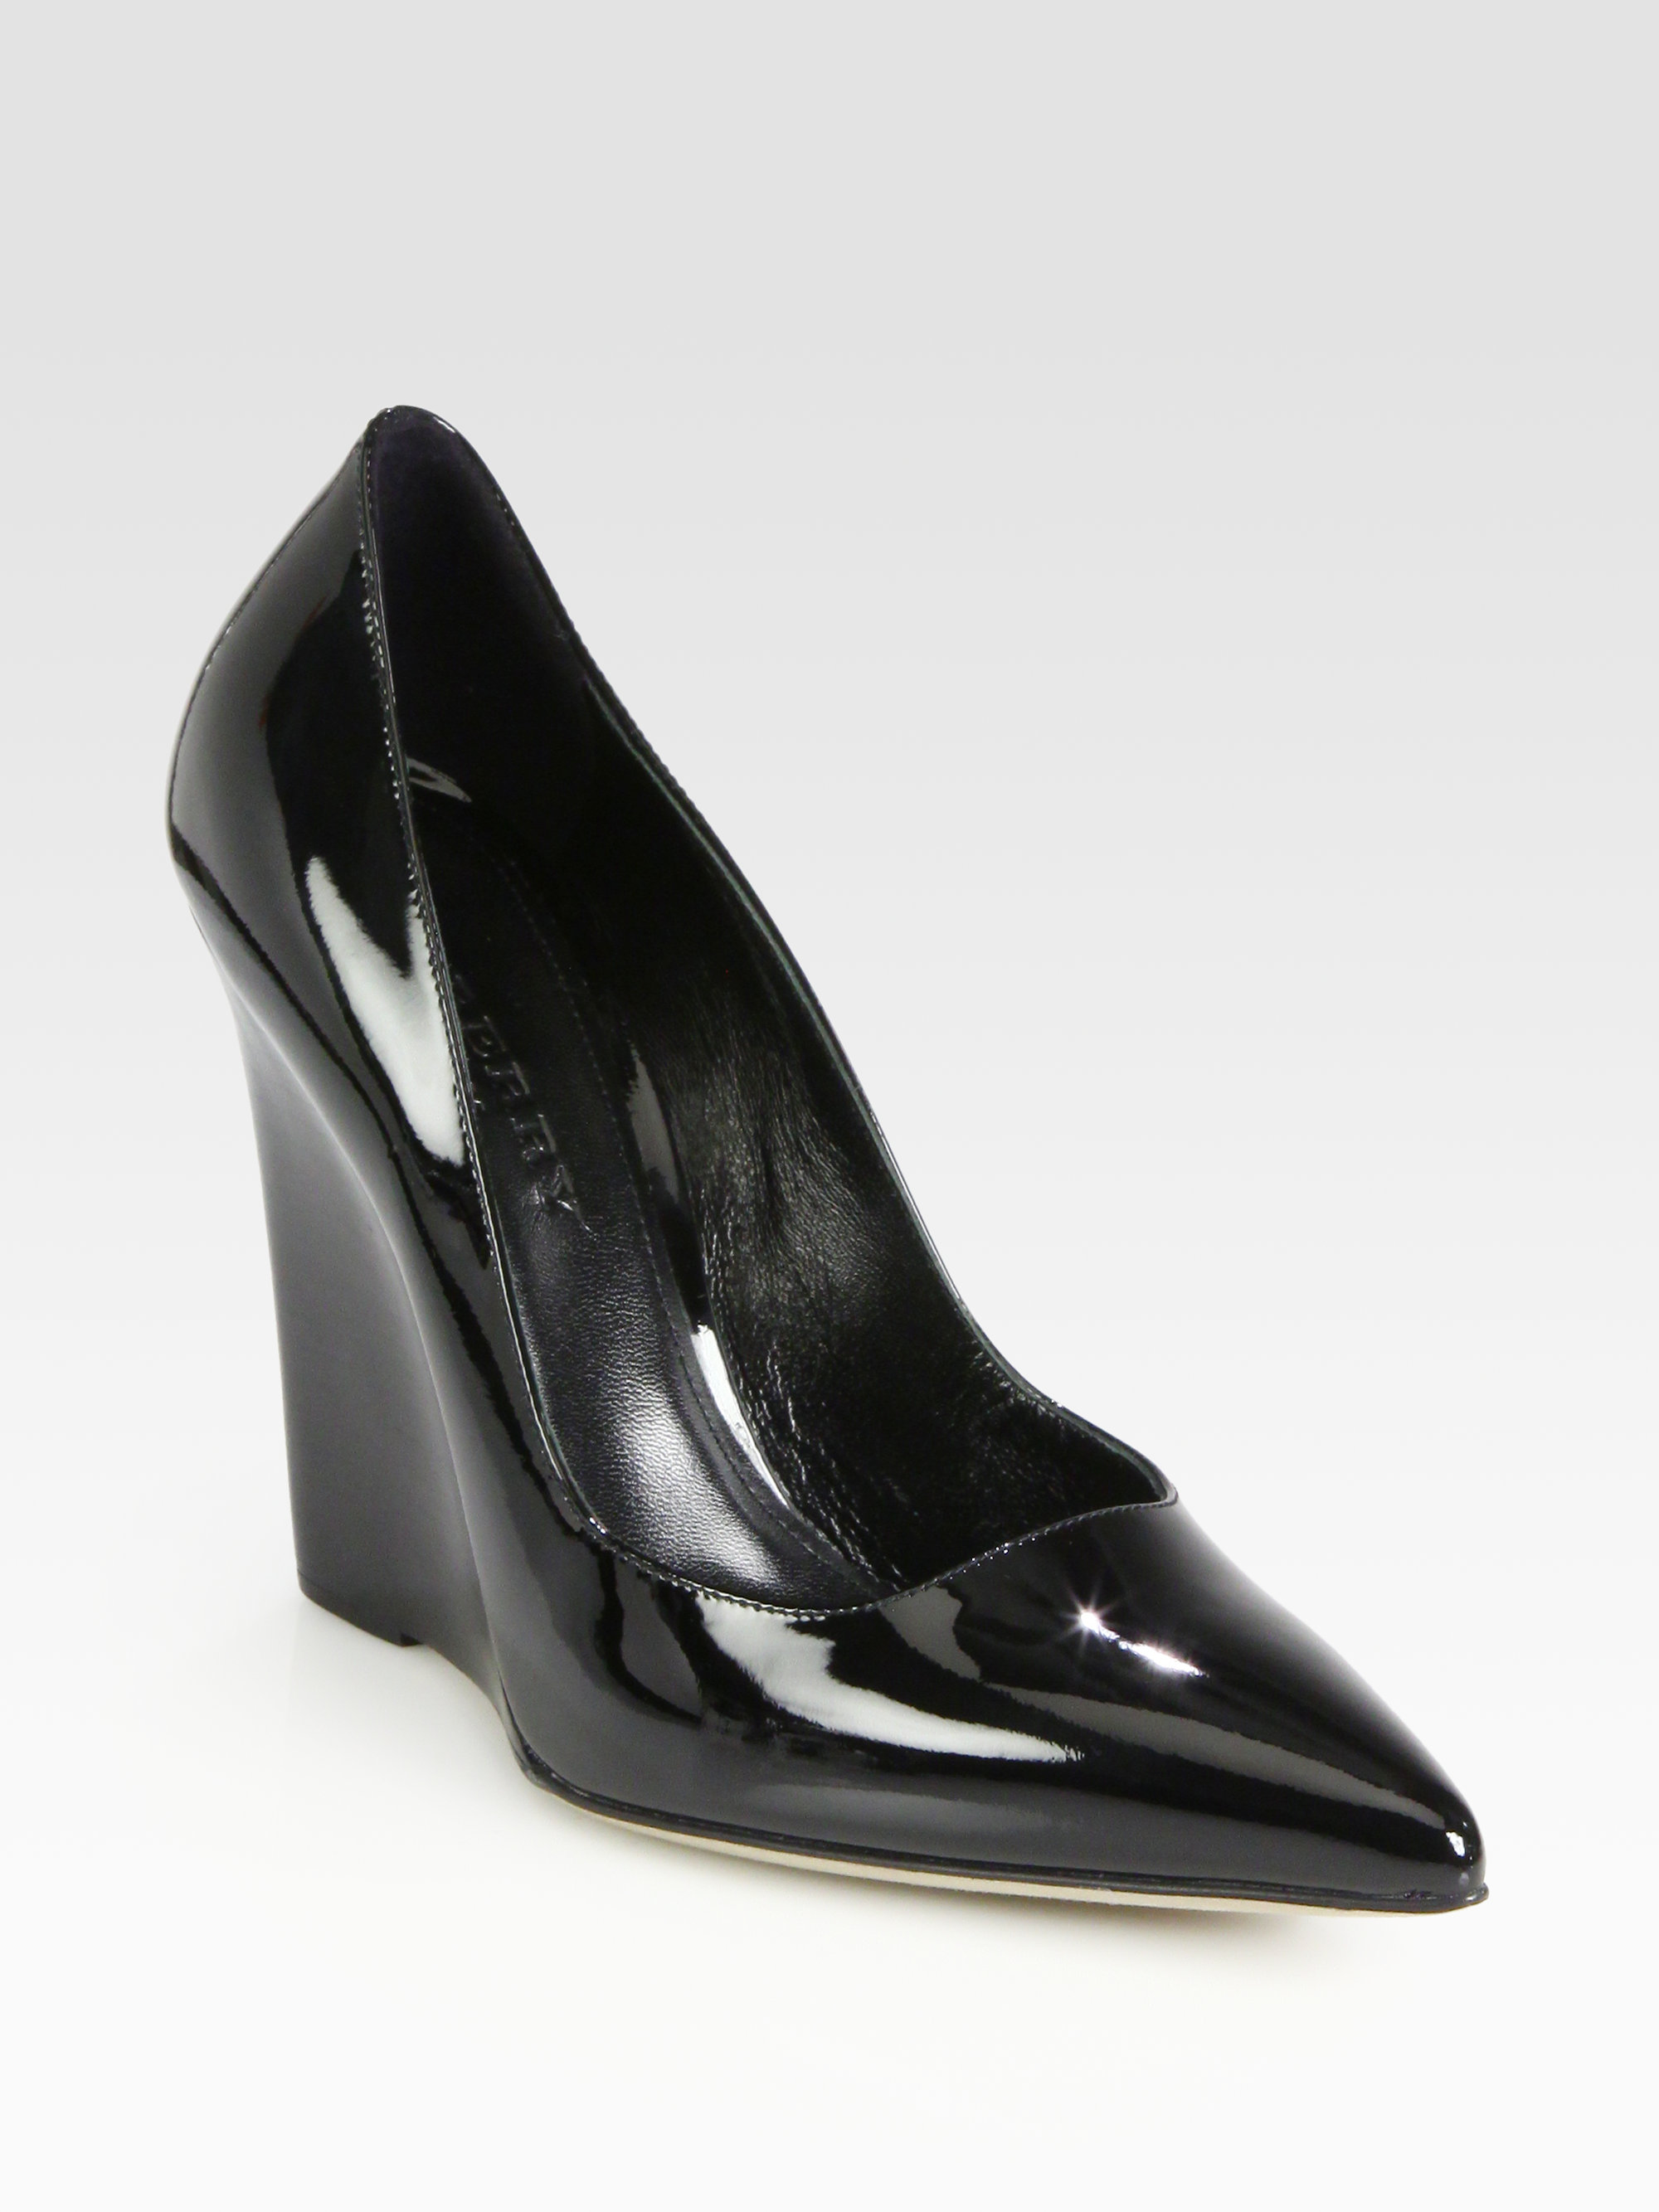 Burberry Wickham Patent Leather Wedge Pumps in Black | Lyst